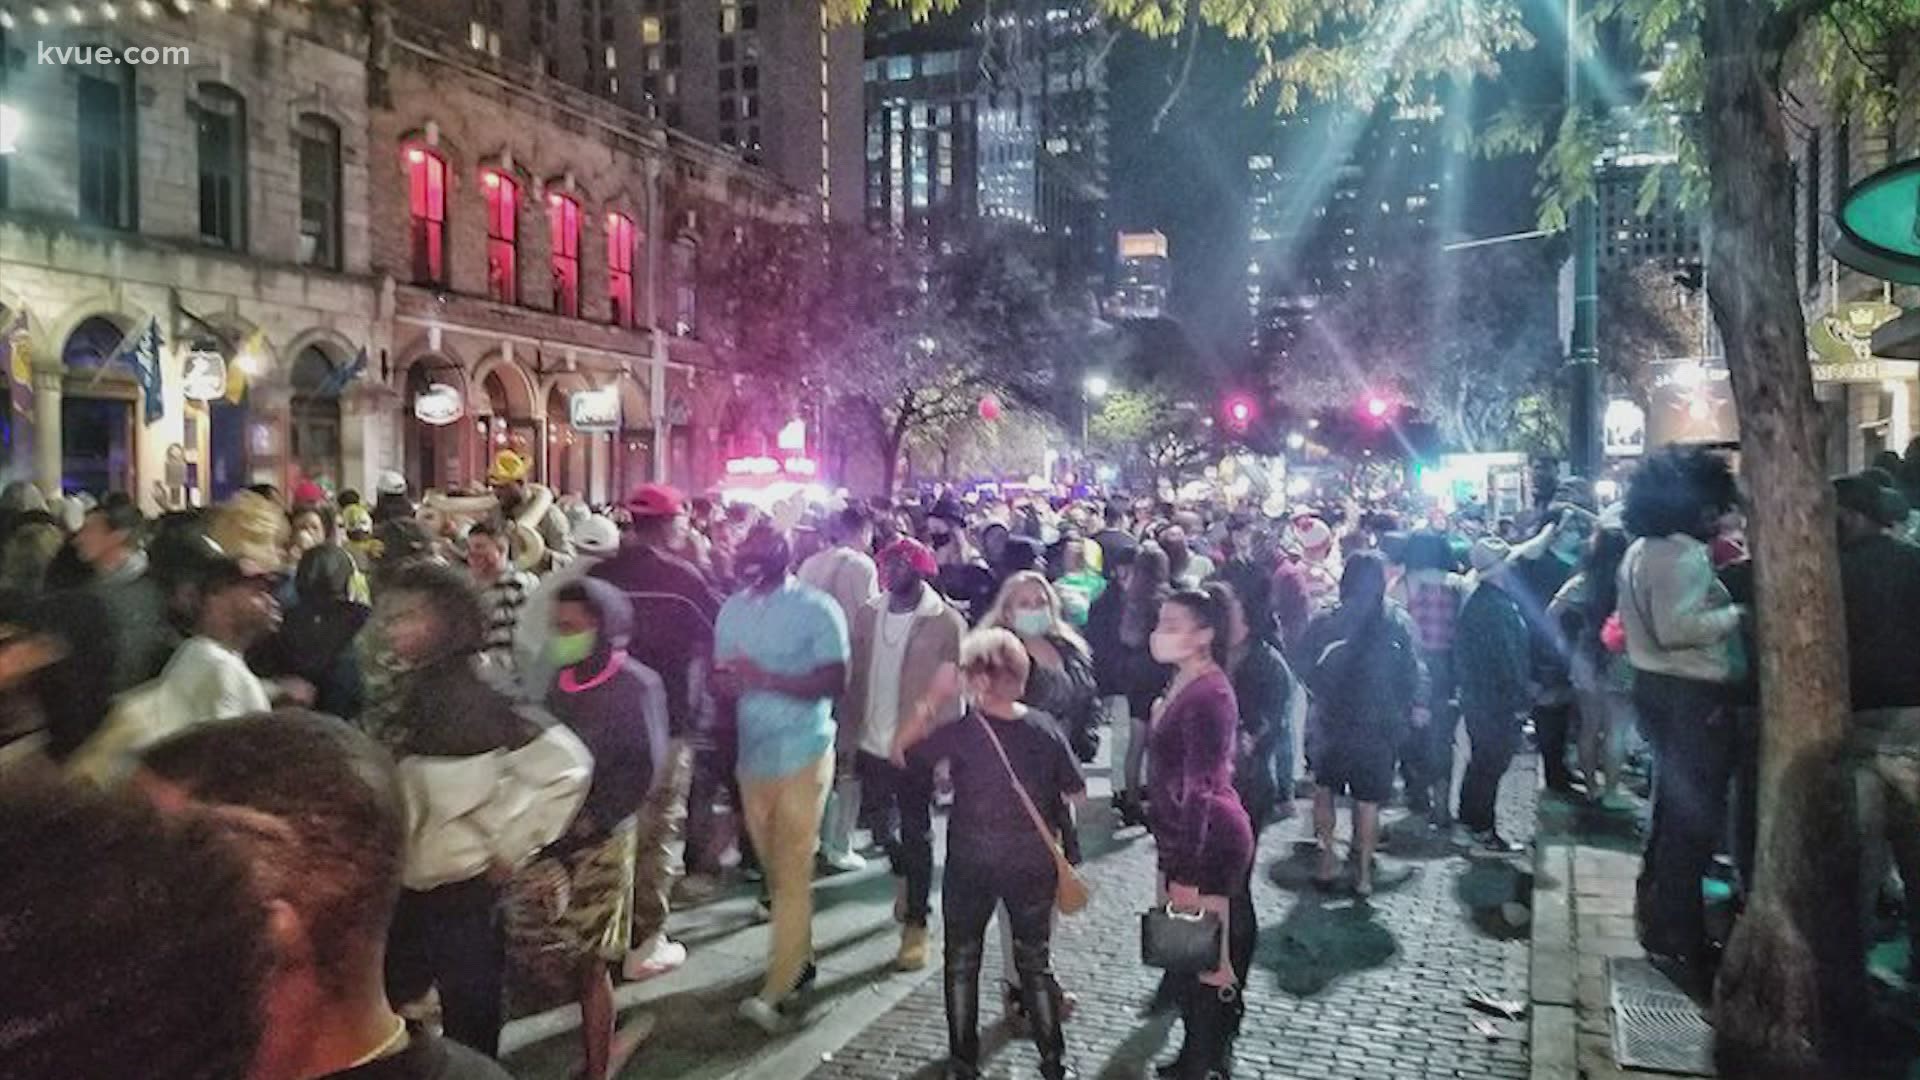 Thousands were seen crowding Sixth Street in Downtown Austin on Halloween night. Many wore masks but few were practicing social distancing.